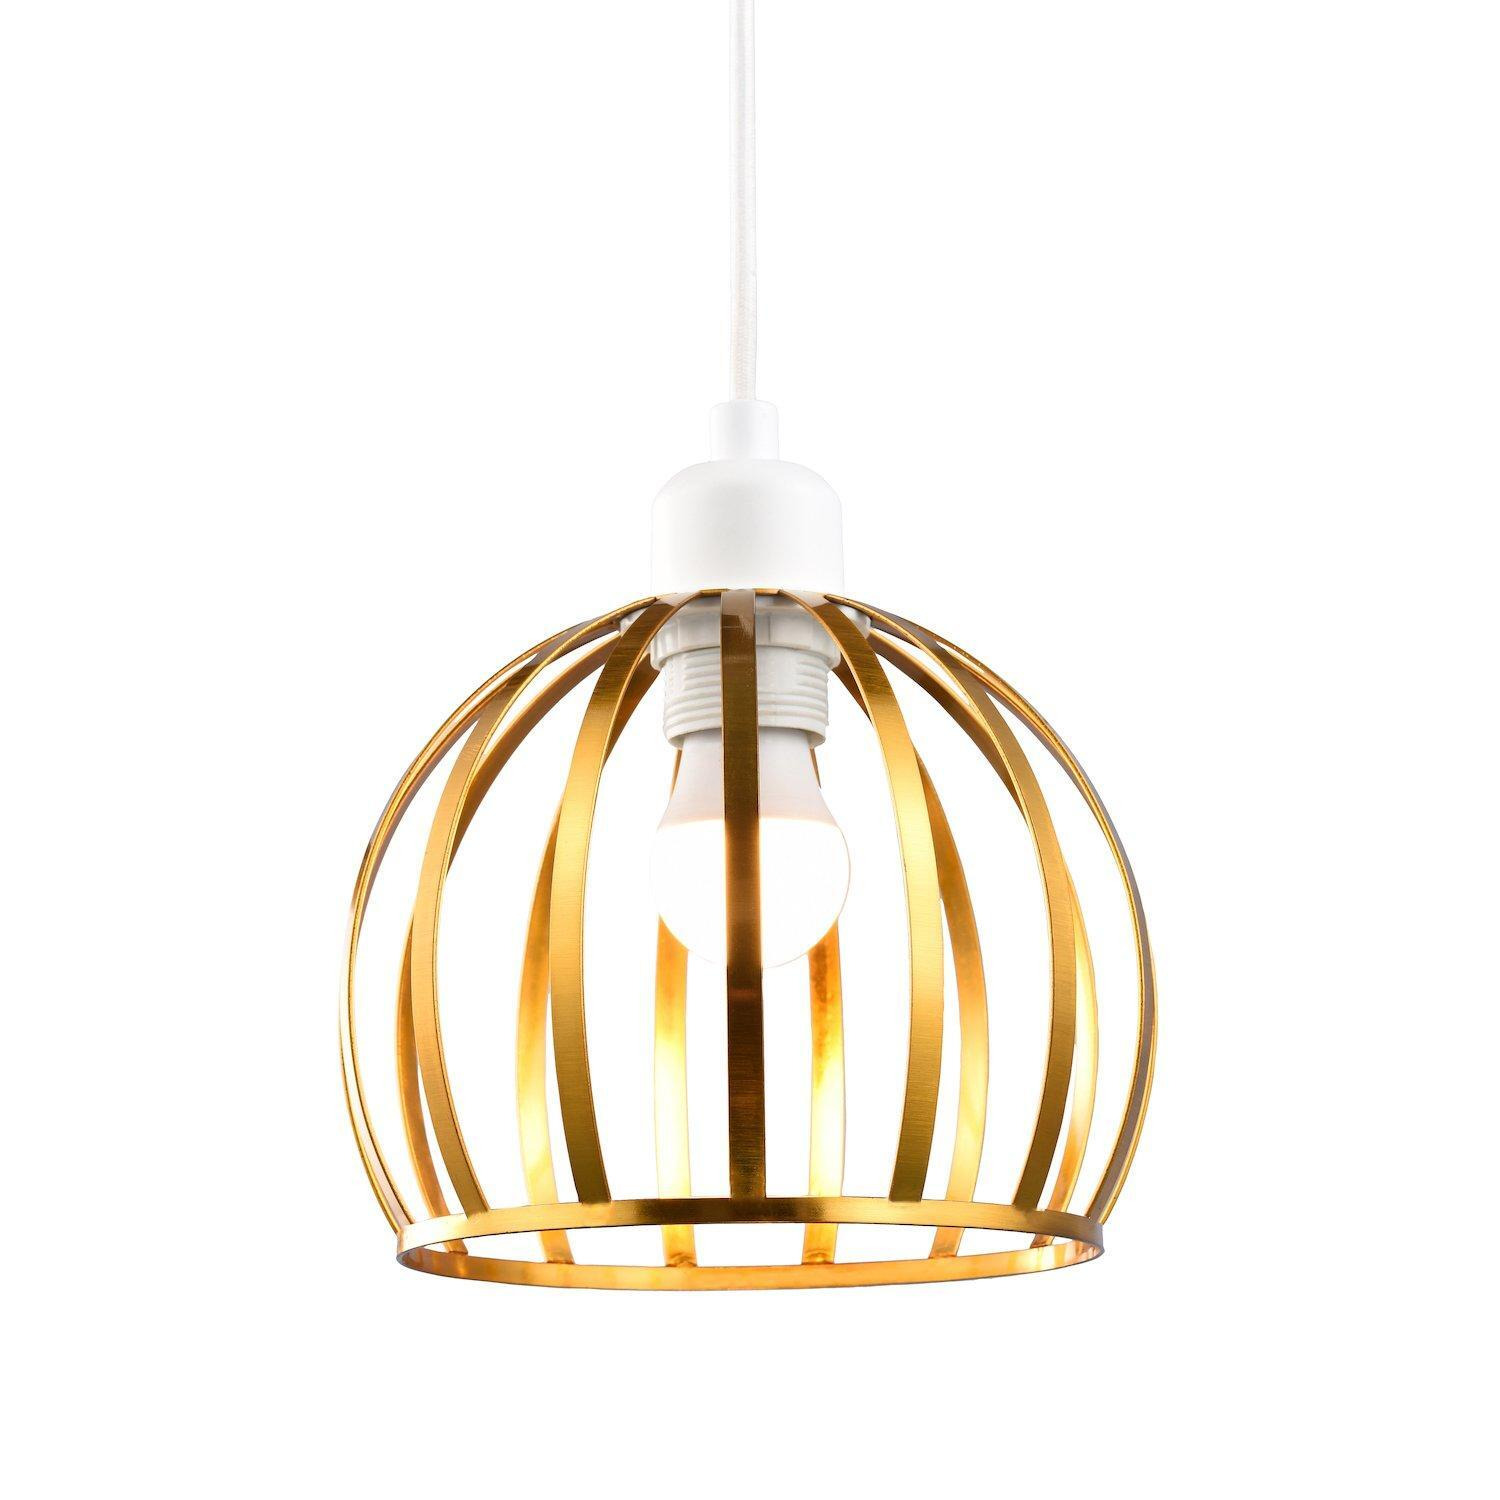 Vintage Round Cage Pendant Shade with Brushed Gold Metal Strips - Chic Design - image 1